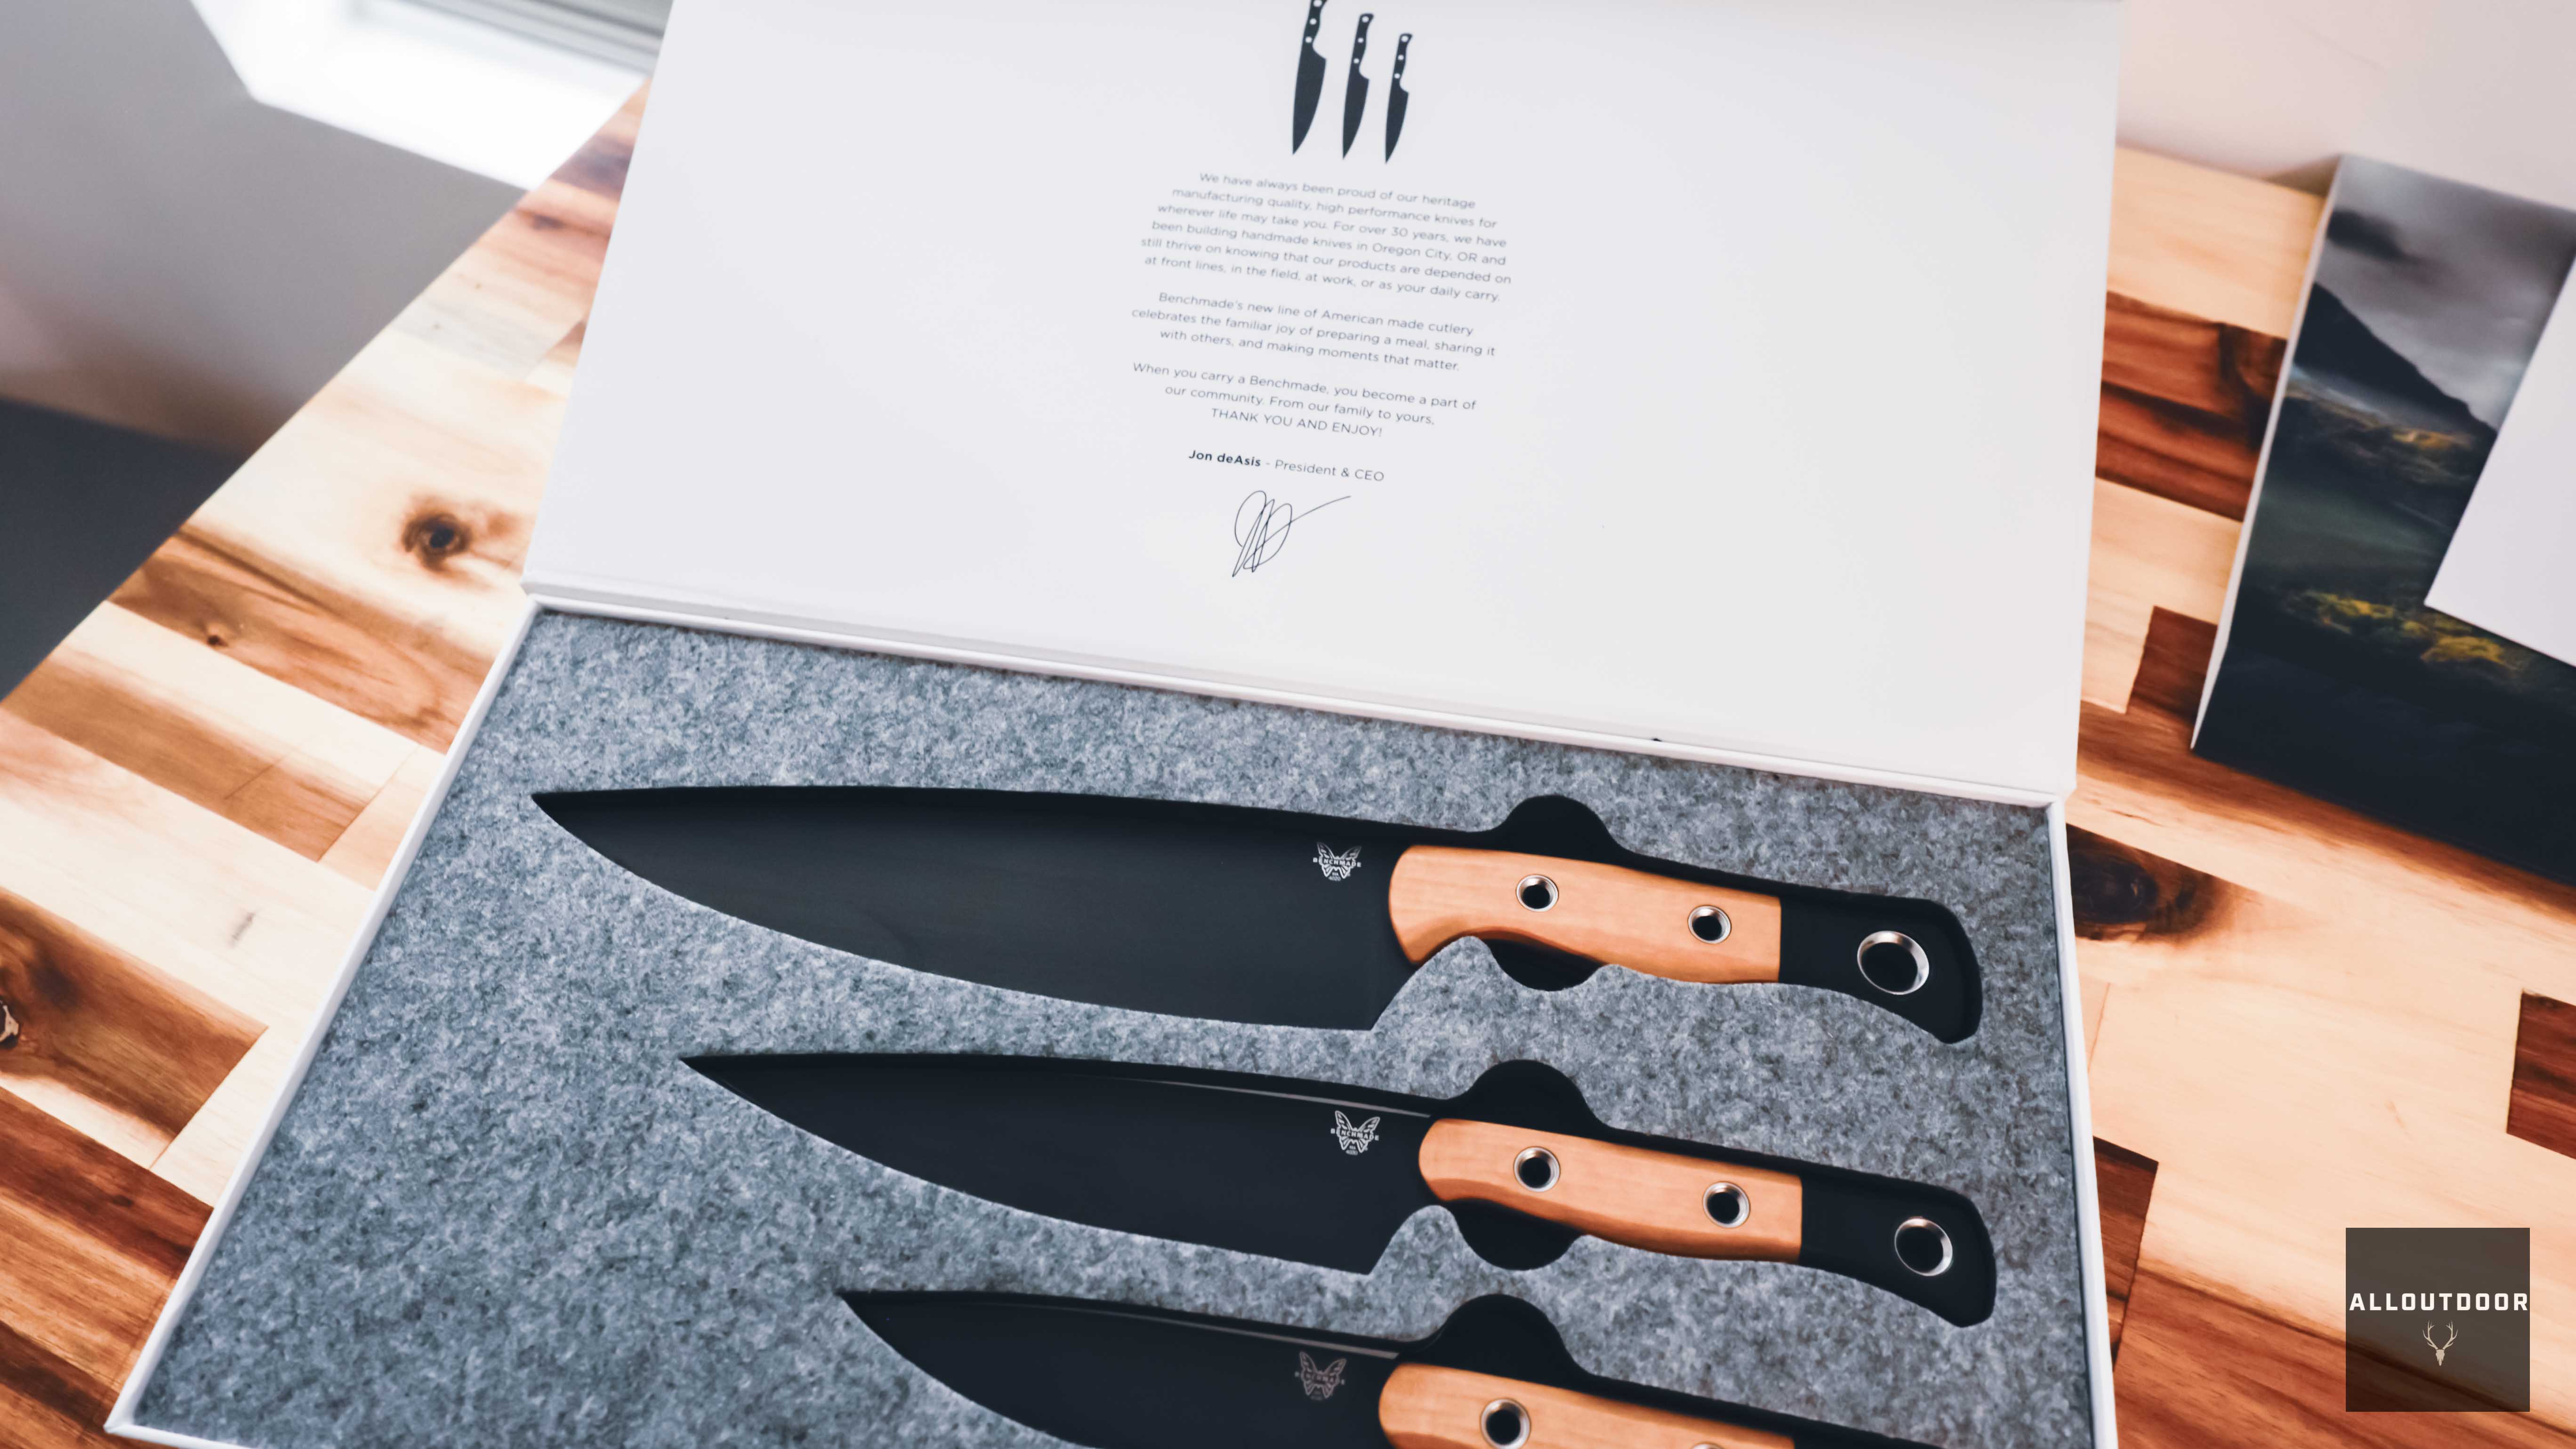 AllOutdoor Review: First Impressions - Benchmade Culinary 3-Piece Set